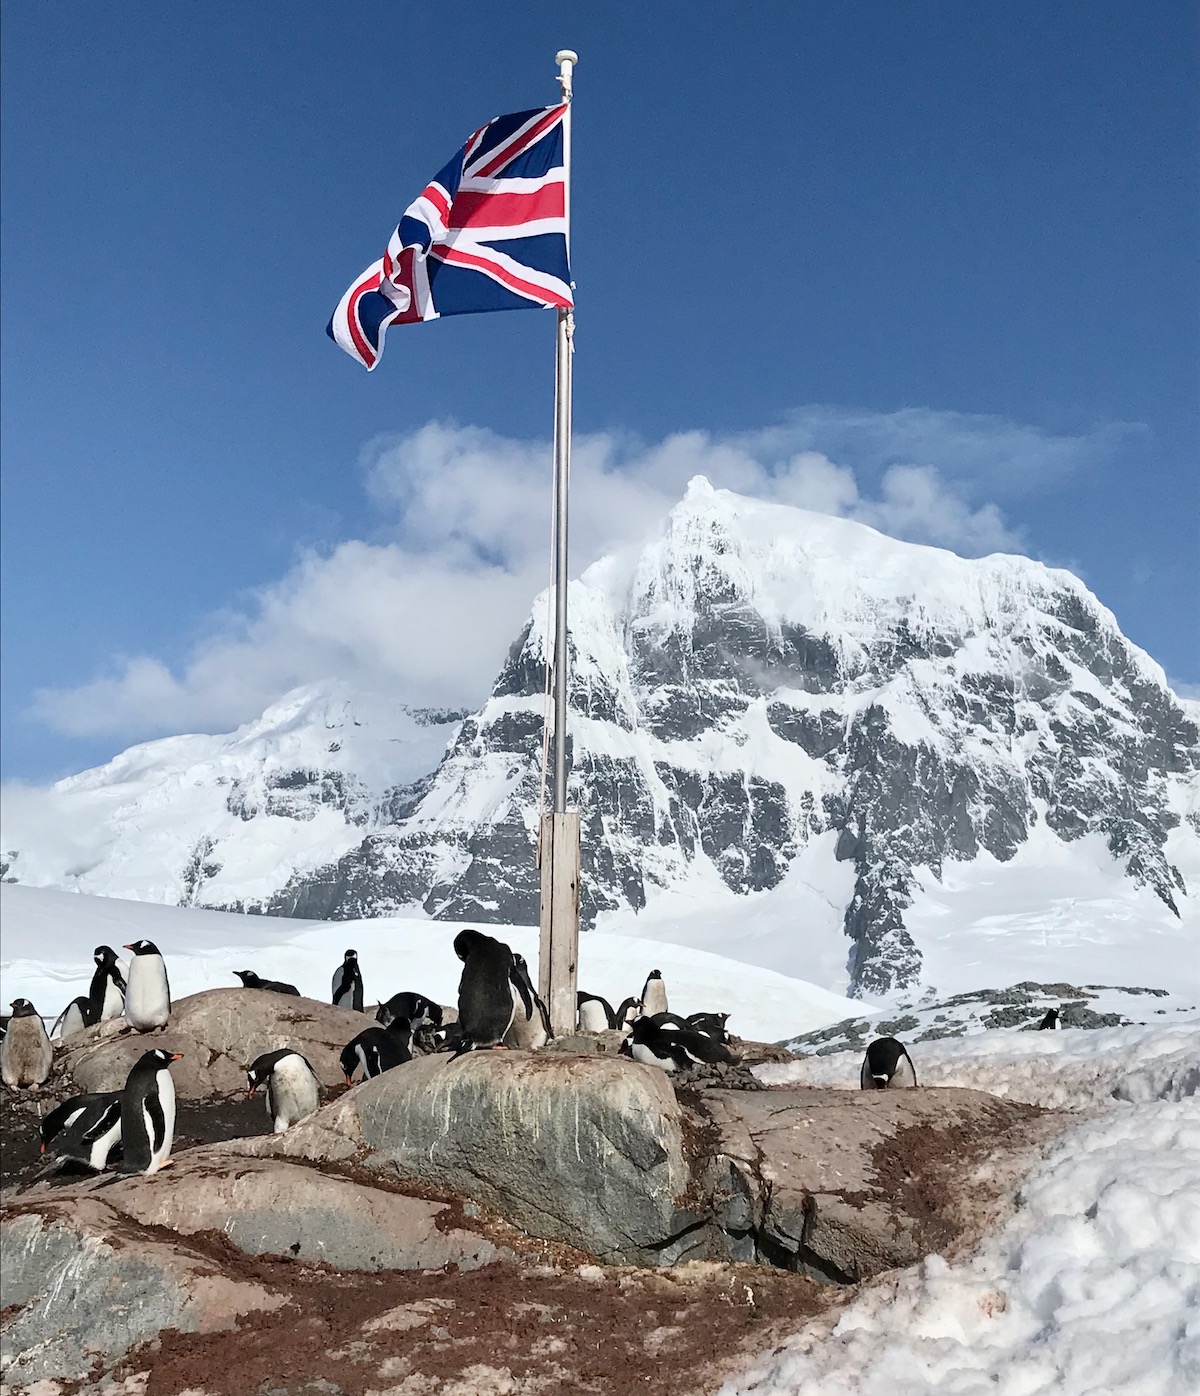 The Union Jack flag flaps in front of a snowy landscape surrounded by penguins in Port Lockroy, Antarctica